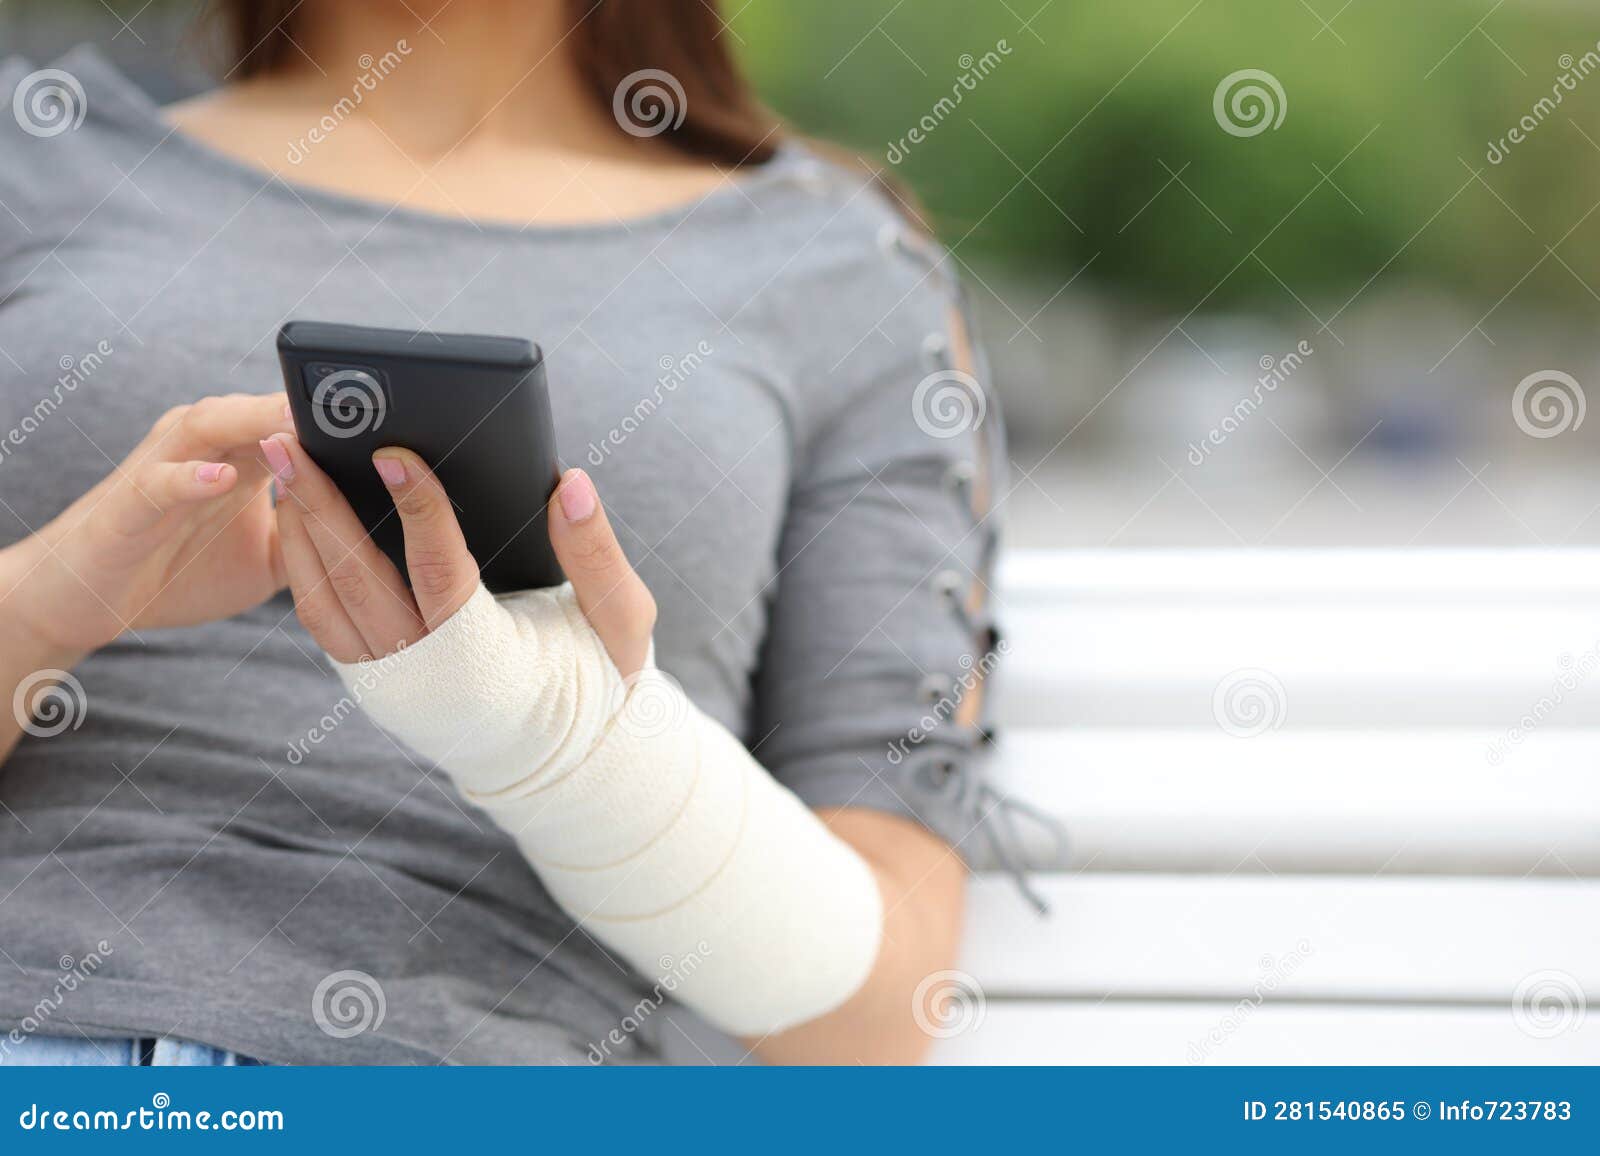 convalescent woman with bandaged arm using phone